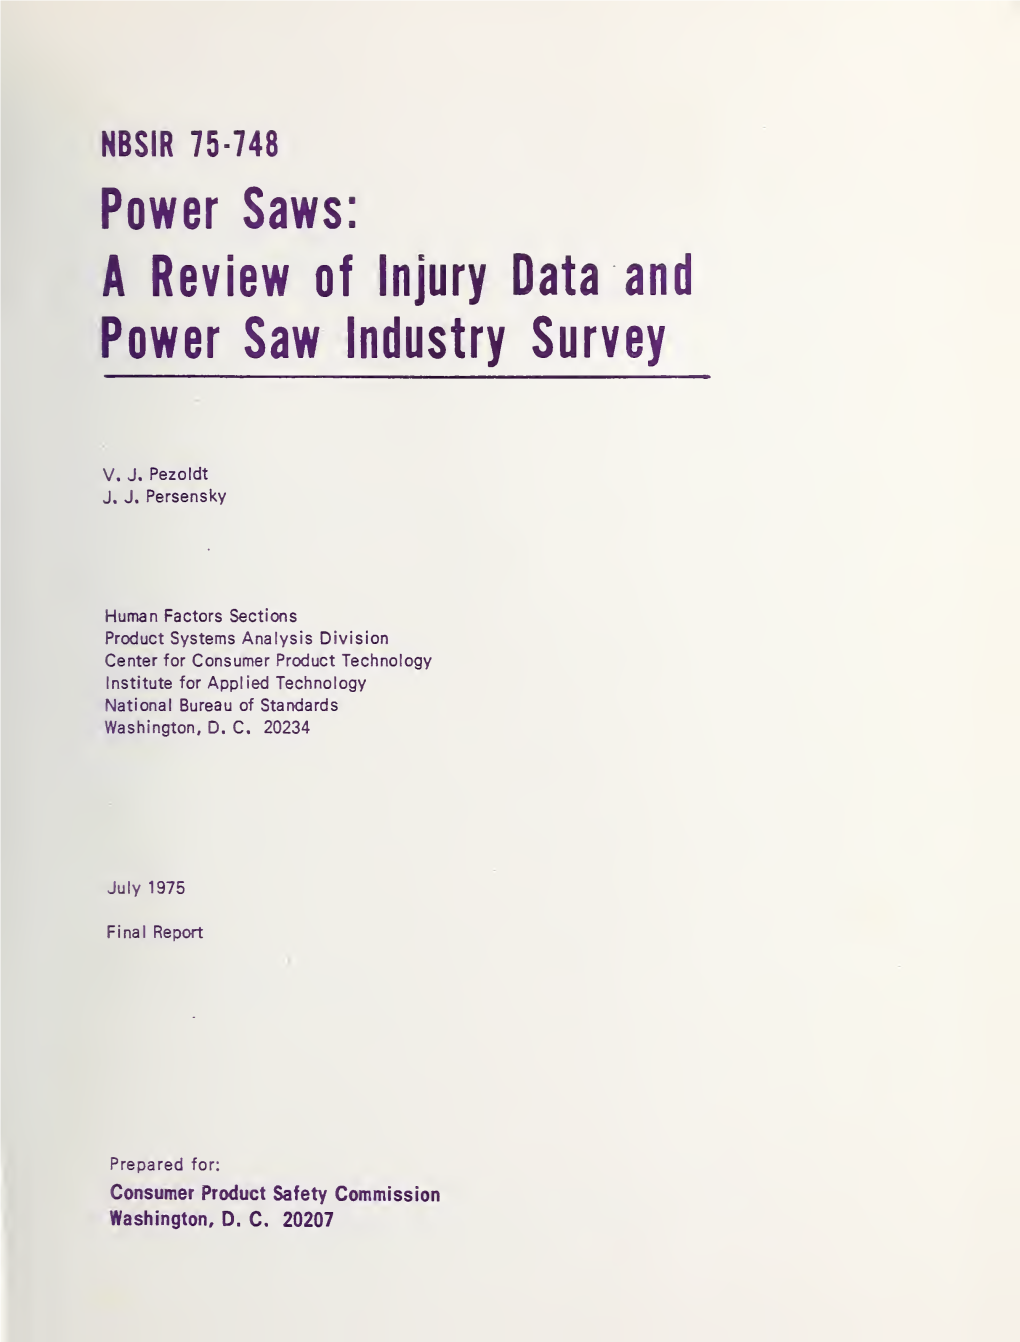 A Review of Injury Data and Power Saw Industry Survey